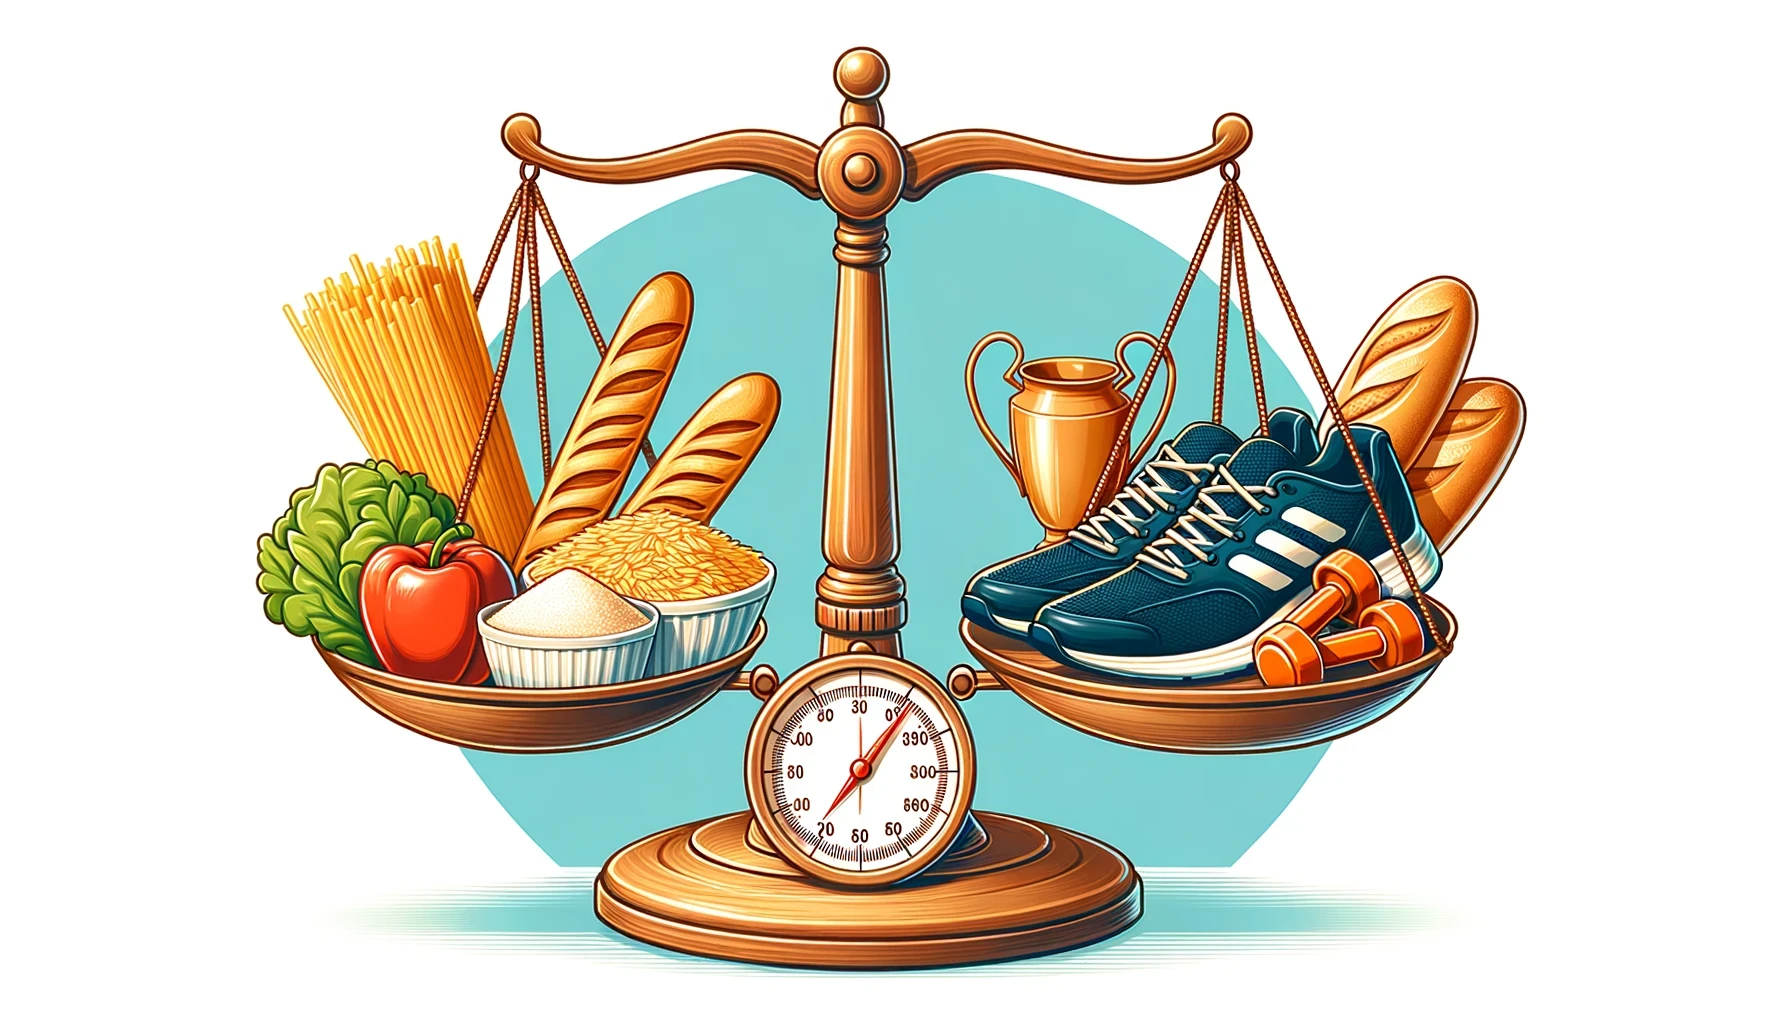 Balanced scale with carbohydrate foods and athletic symbols.